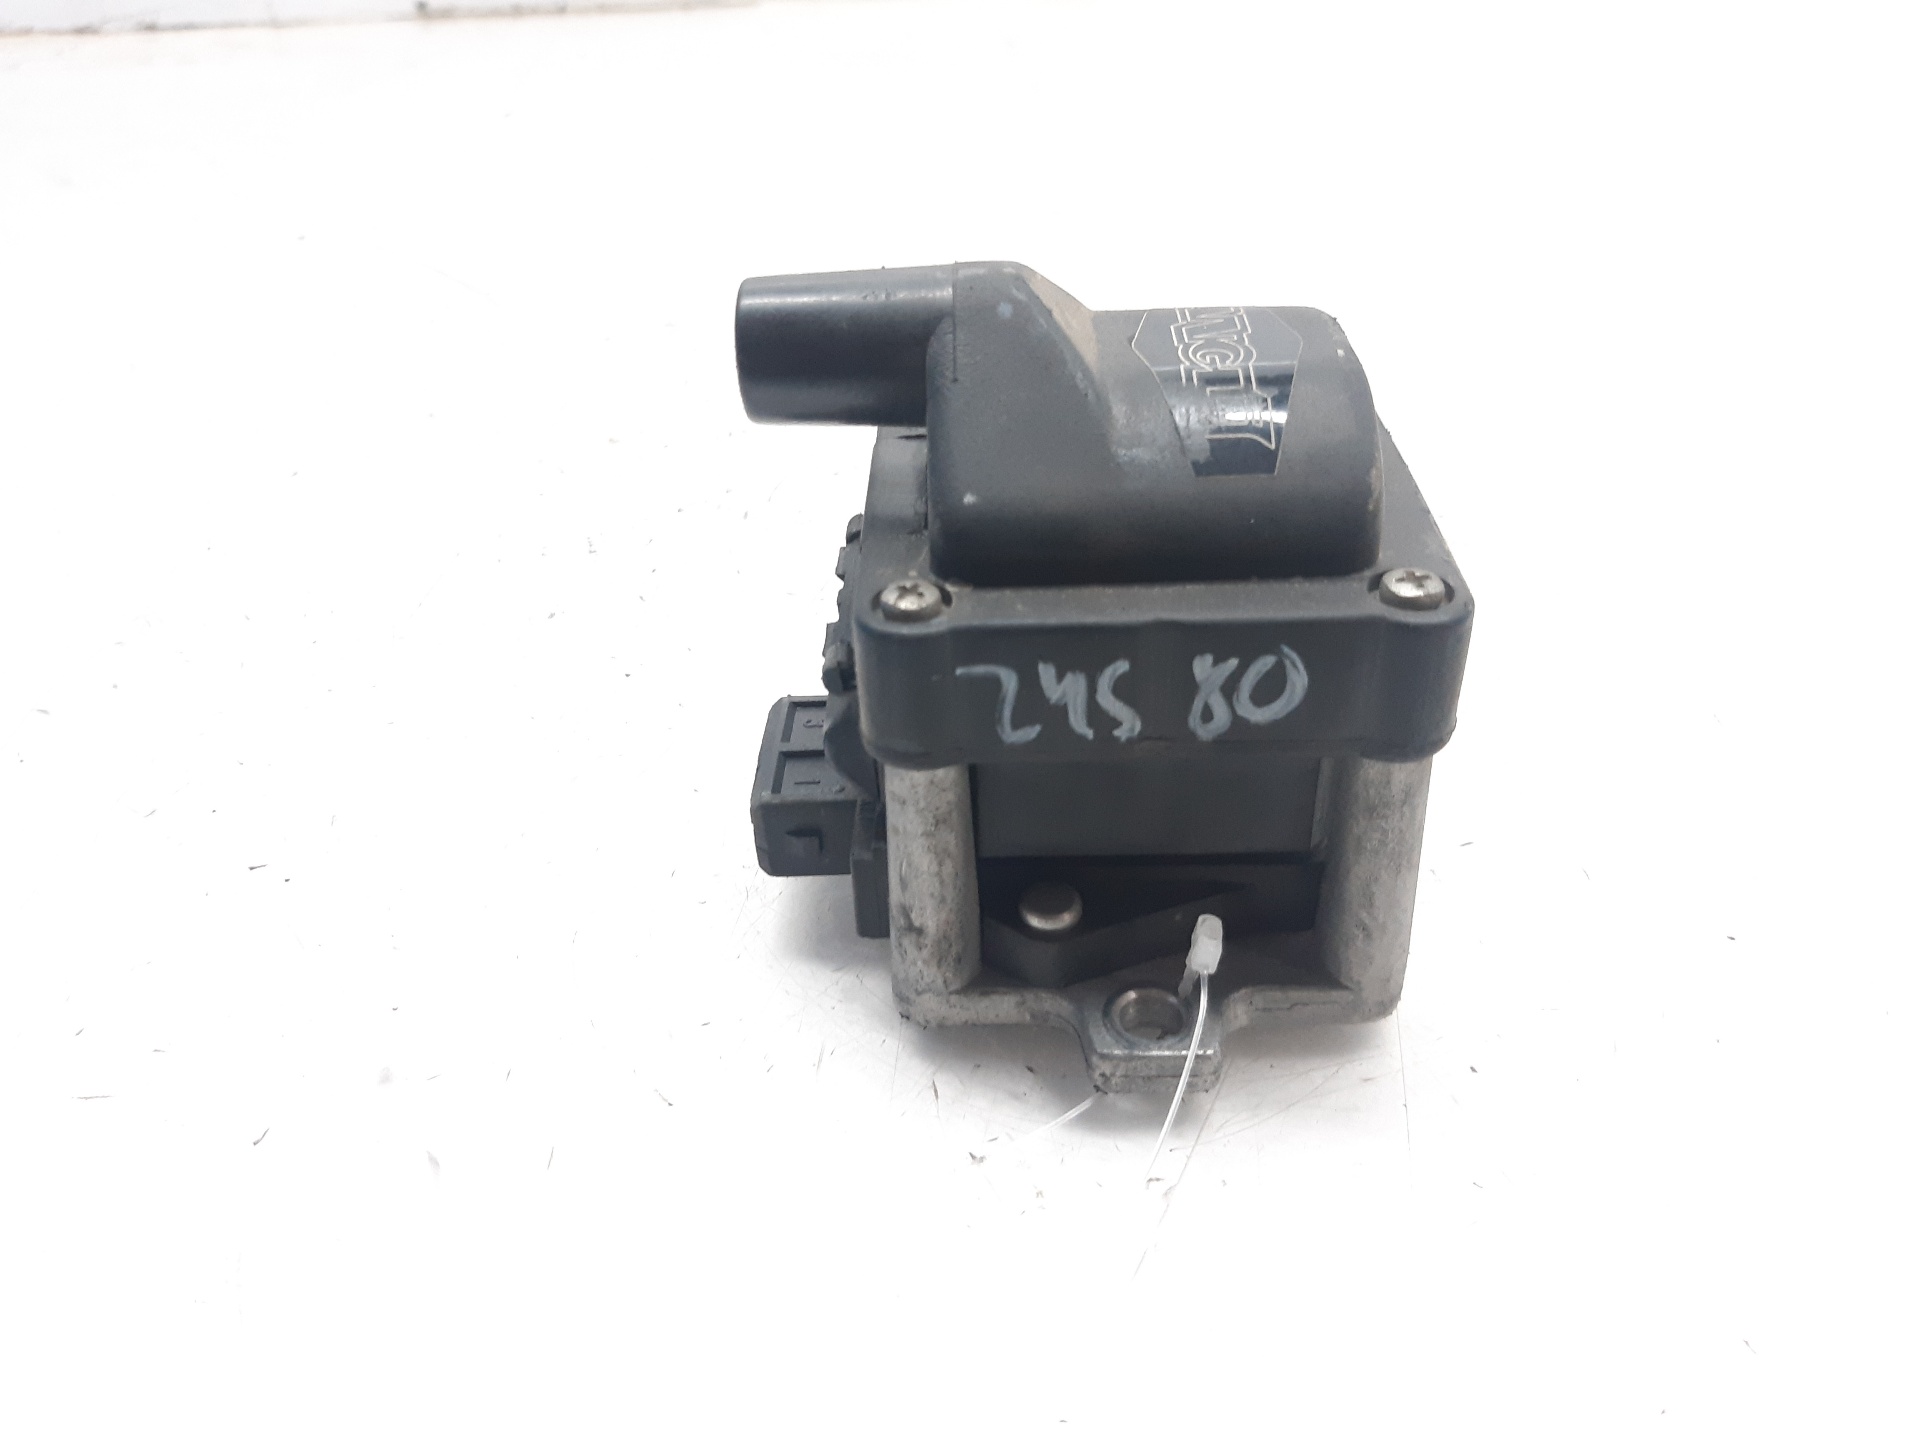 VOLKSWAGEN Polo 3 generation (1994-2002) High Voltage Ignition Coil 001111 24932346